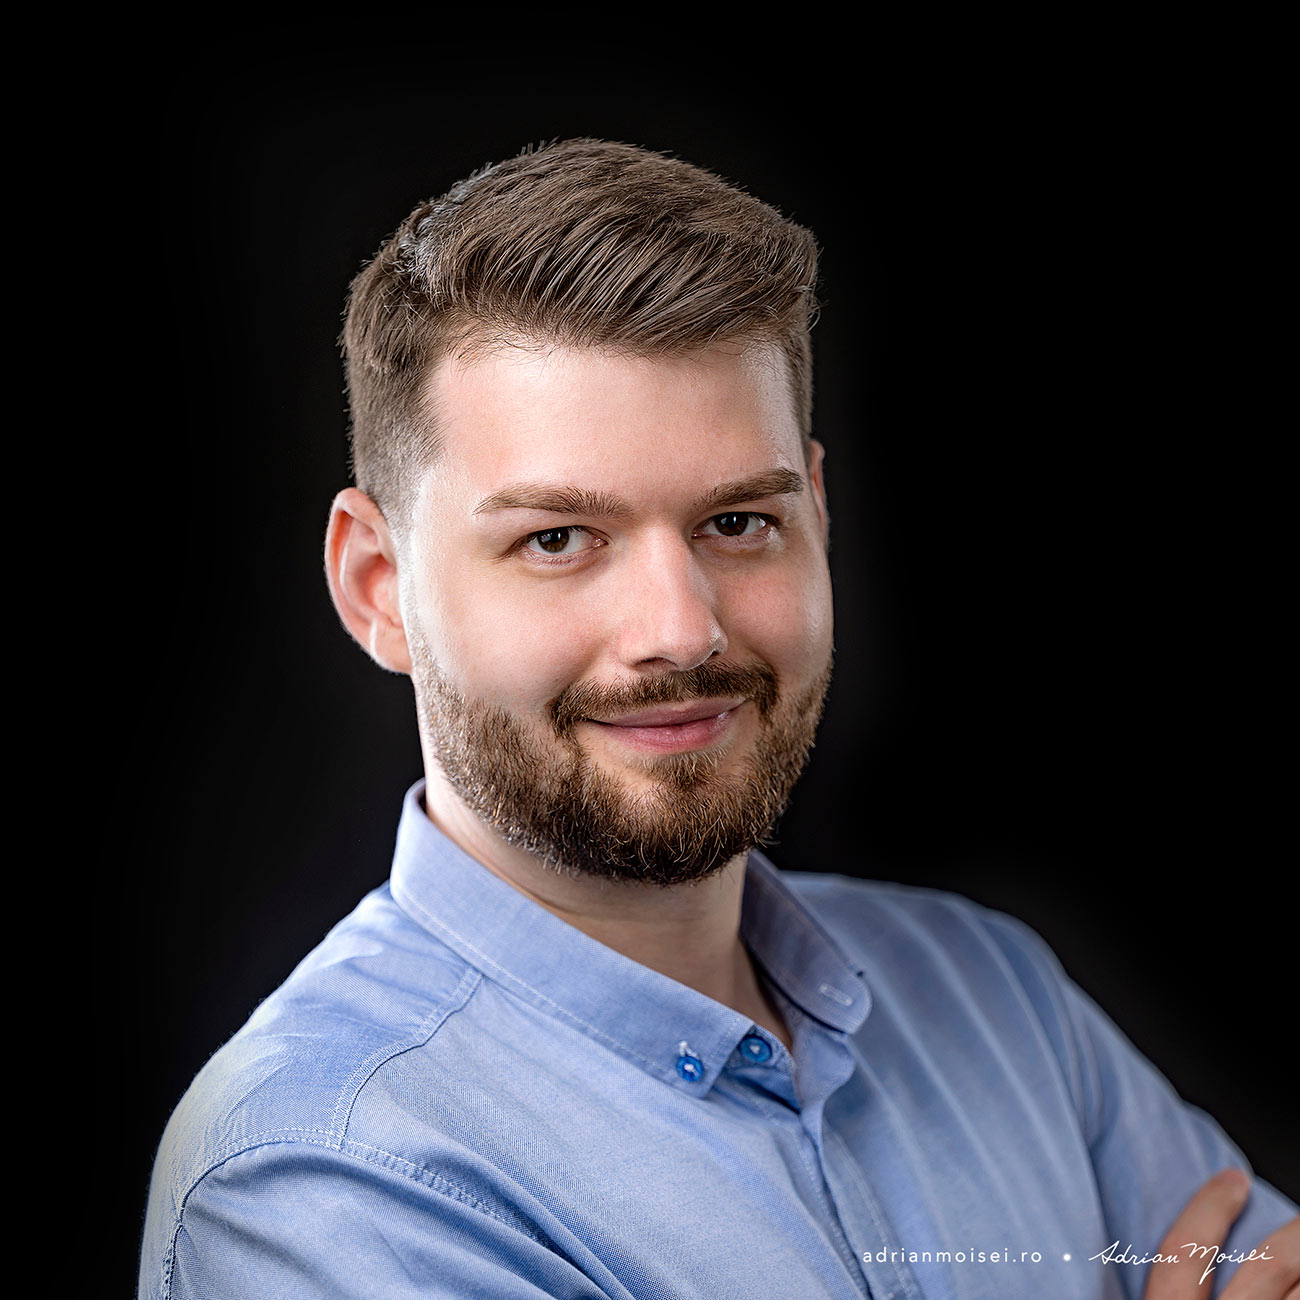 Profile photos for skilled freelancer in mobile solutions for iOS and Android - studio foto video in Iasi - fotograf Iasi Adrian Moisei